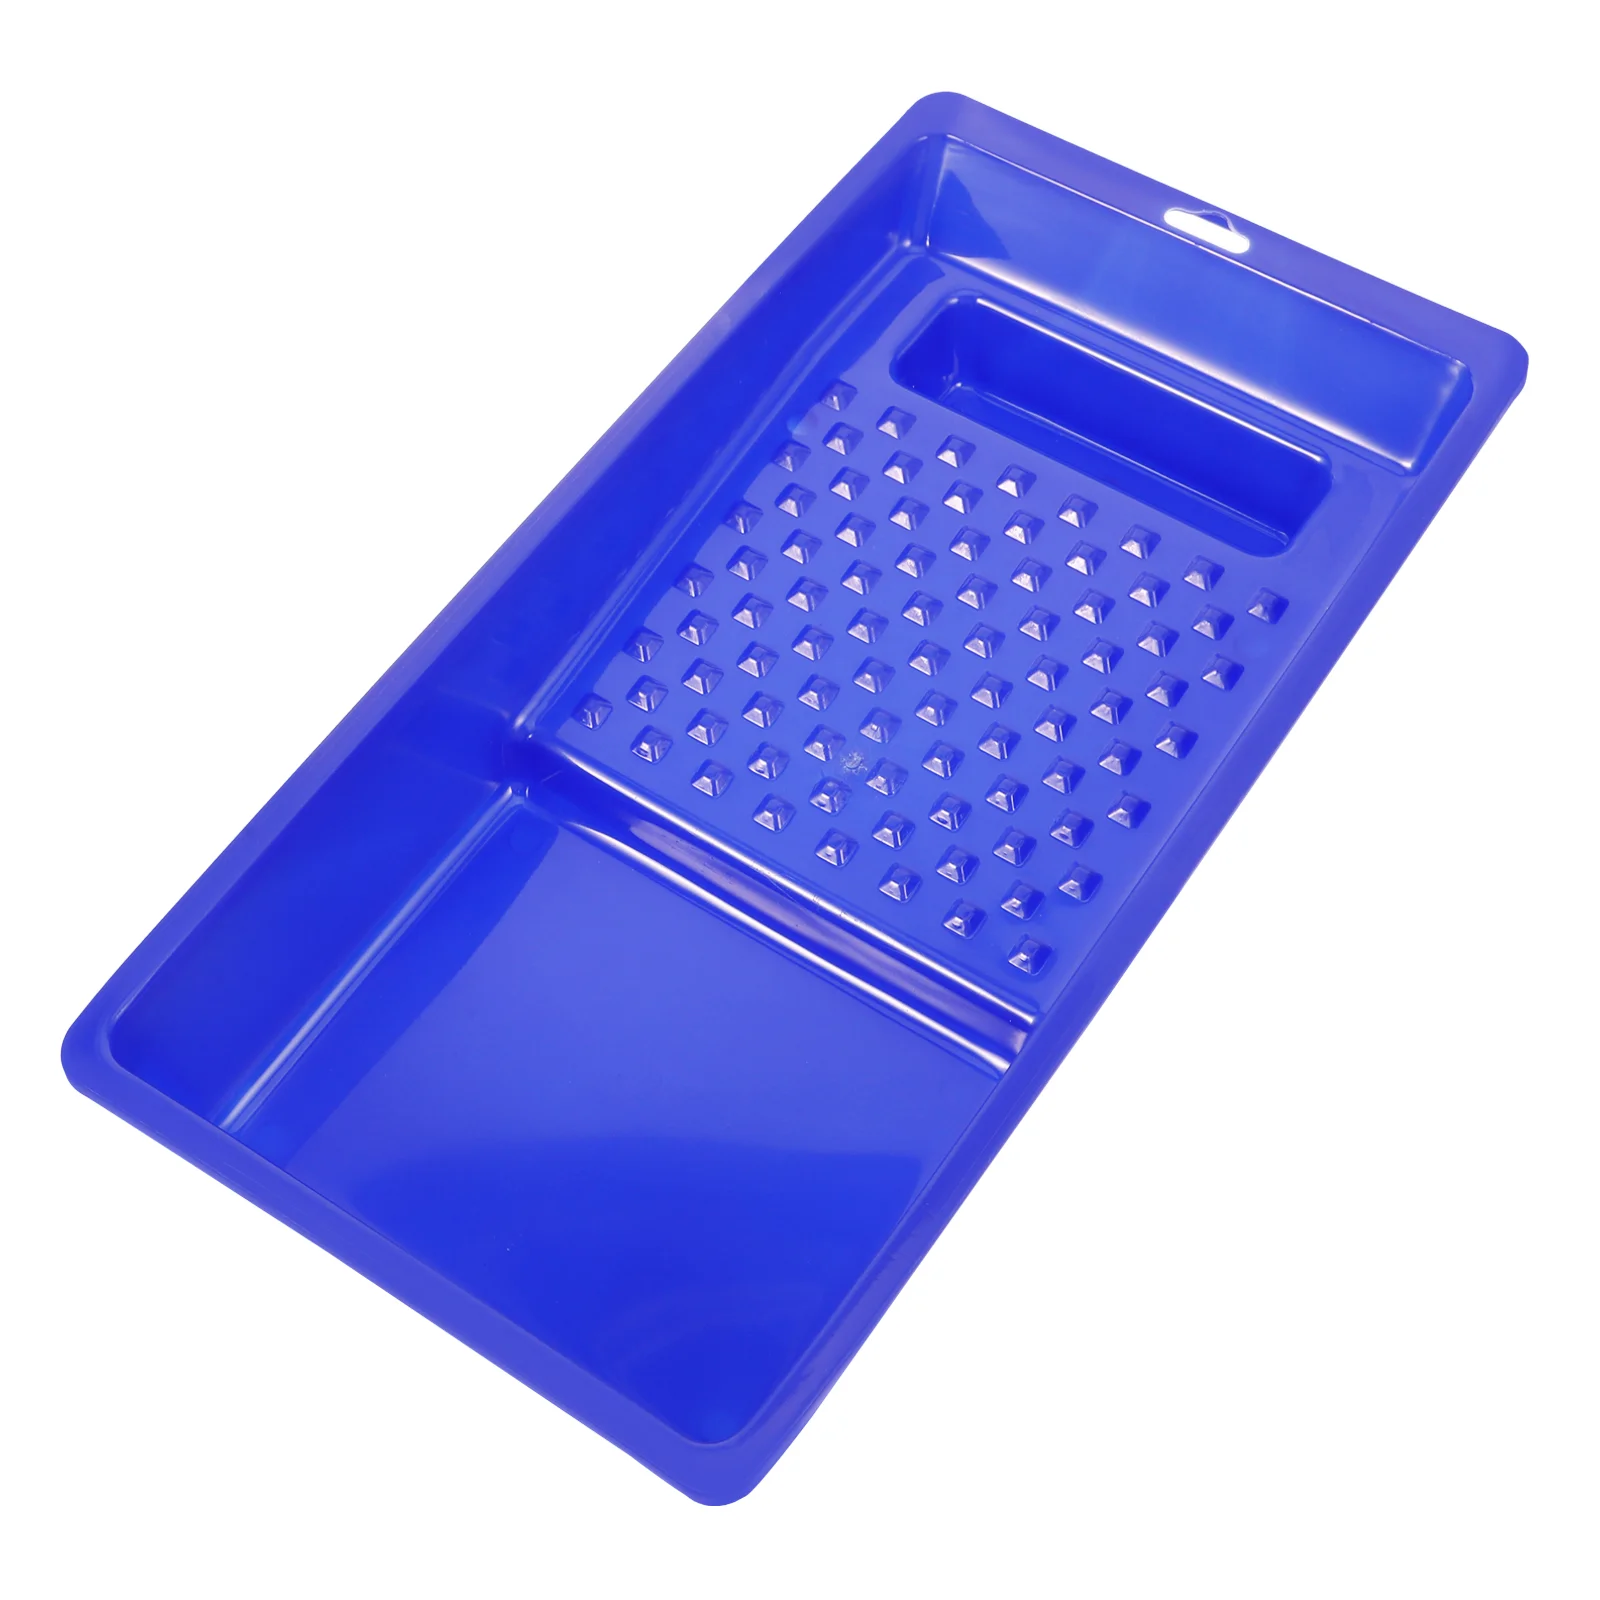 

Paint Tray Trays Painting Color Colors Mixing Tools Plastic Coating Pigment Mixed Holders Container